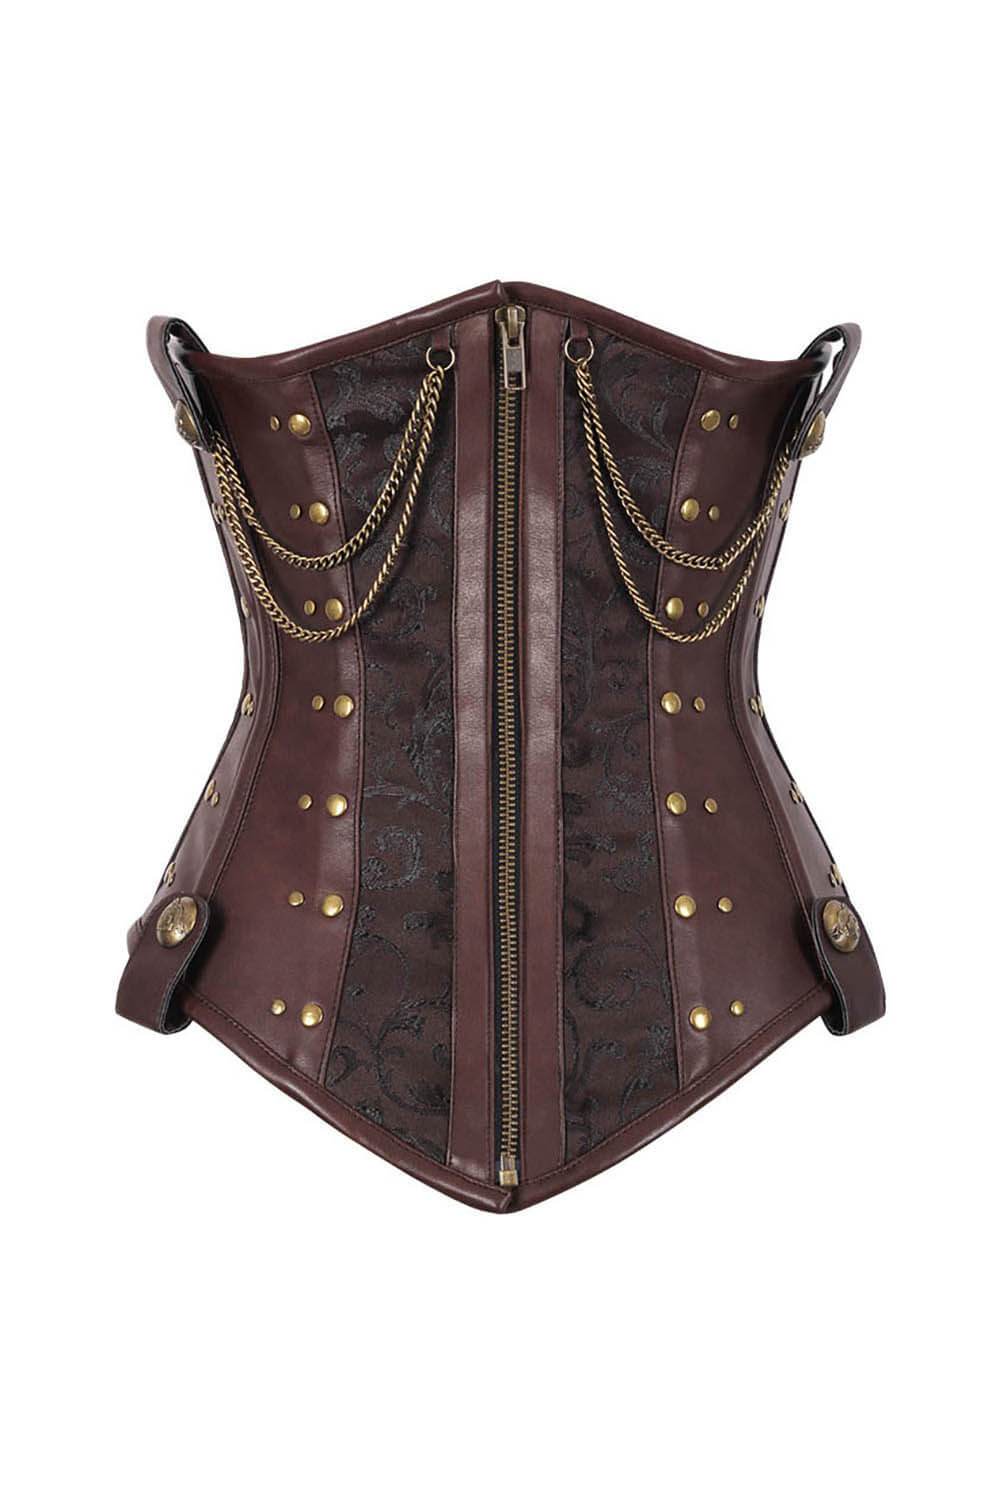 Check Out Some Great Designs Of Steampunk Corsets Plus Size Here